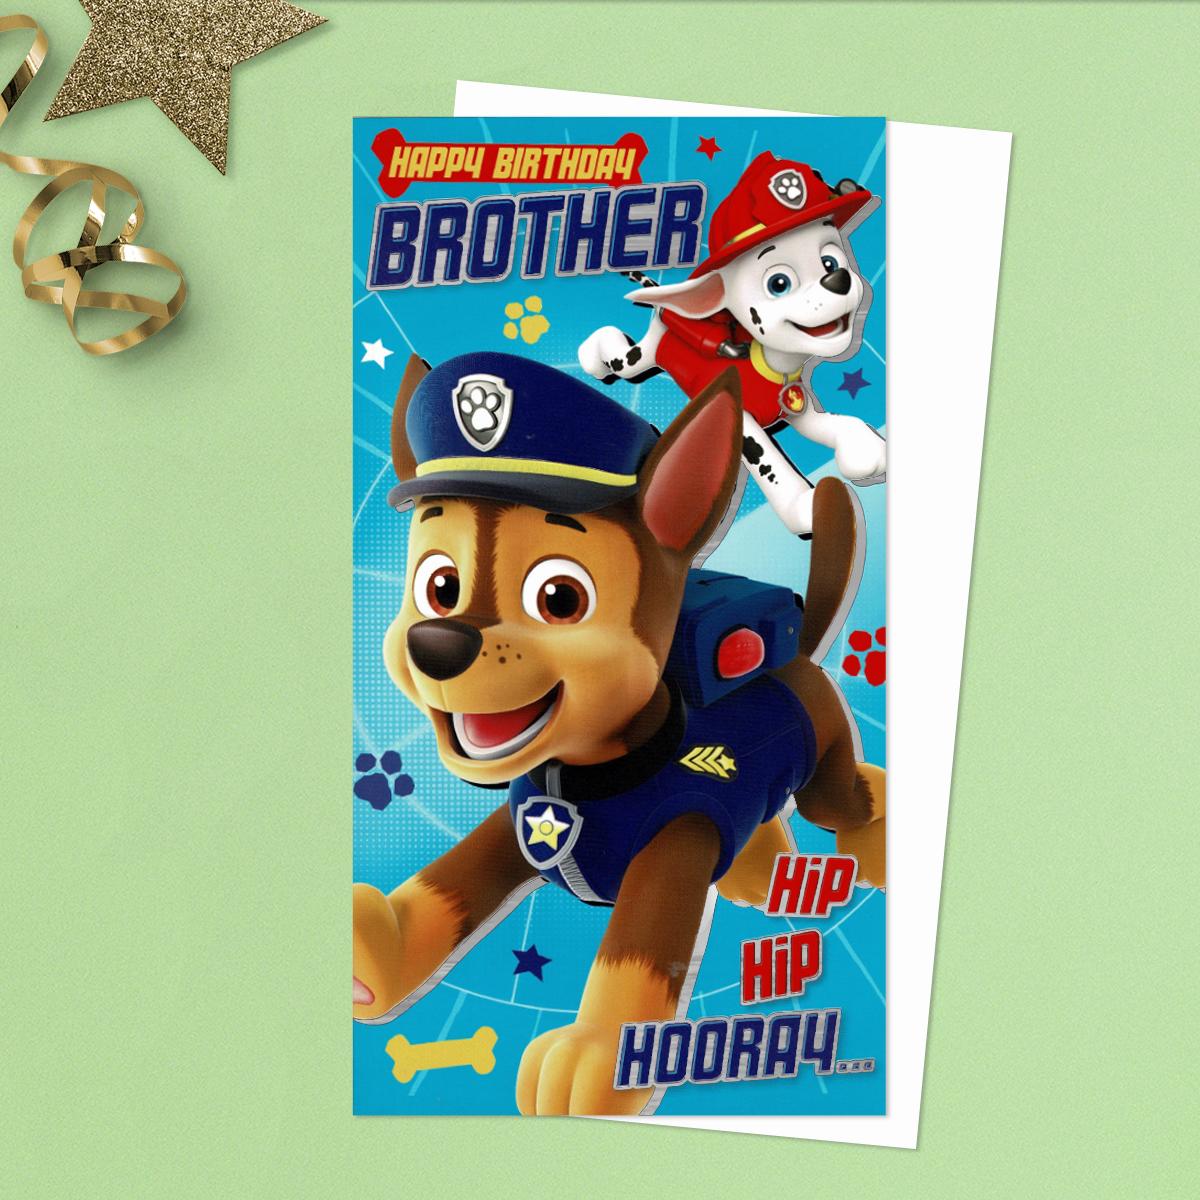 Happy Birthday Brother Hip Hip Hooray Featuring Paw Patrol Puppies Marshall And Chase. Vibrant Colour  With Silver Foil Detail. Complete With White Envelope